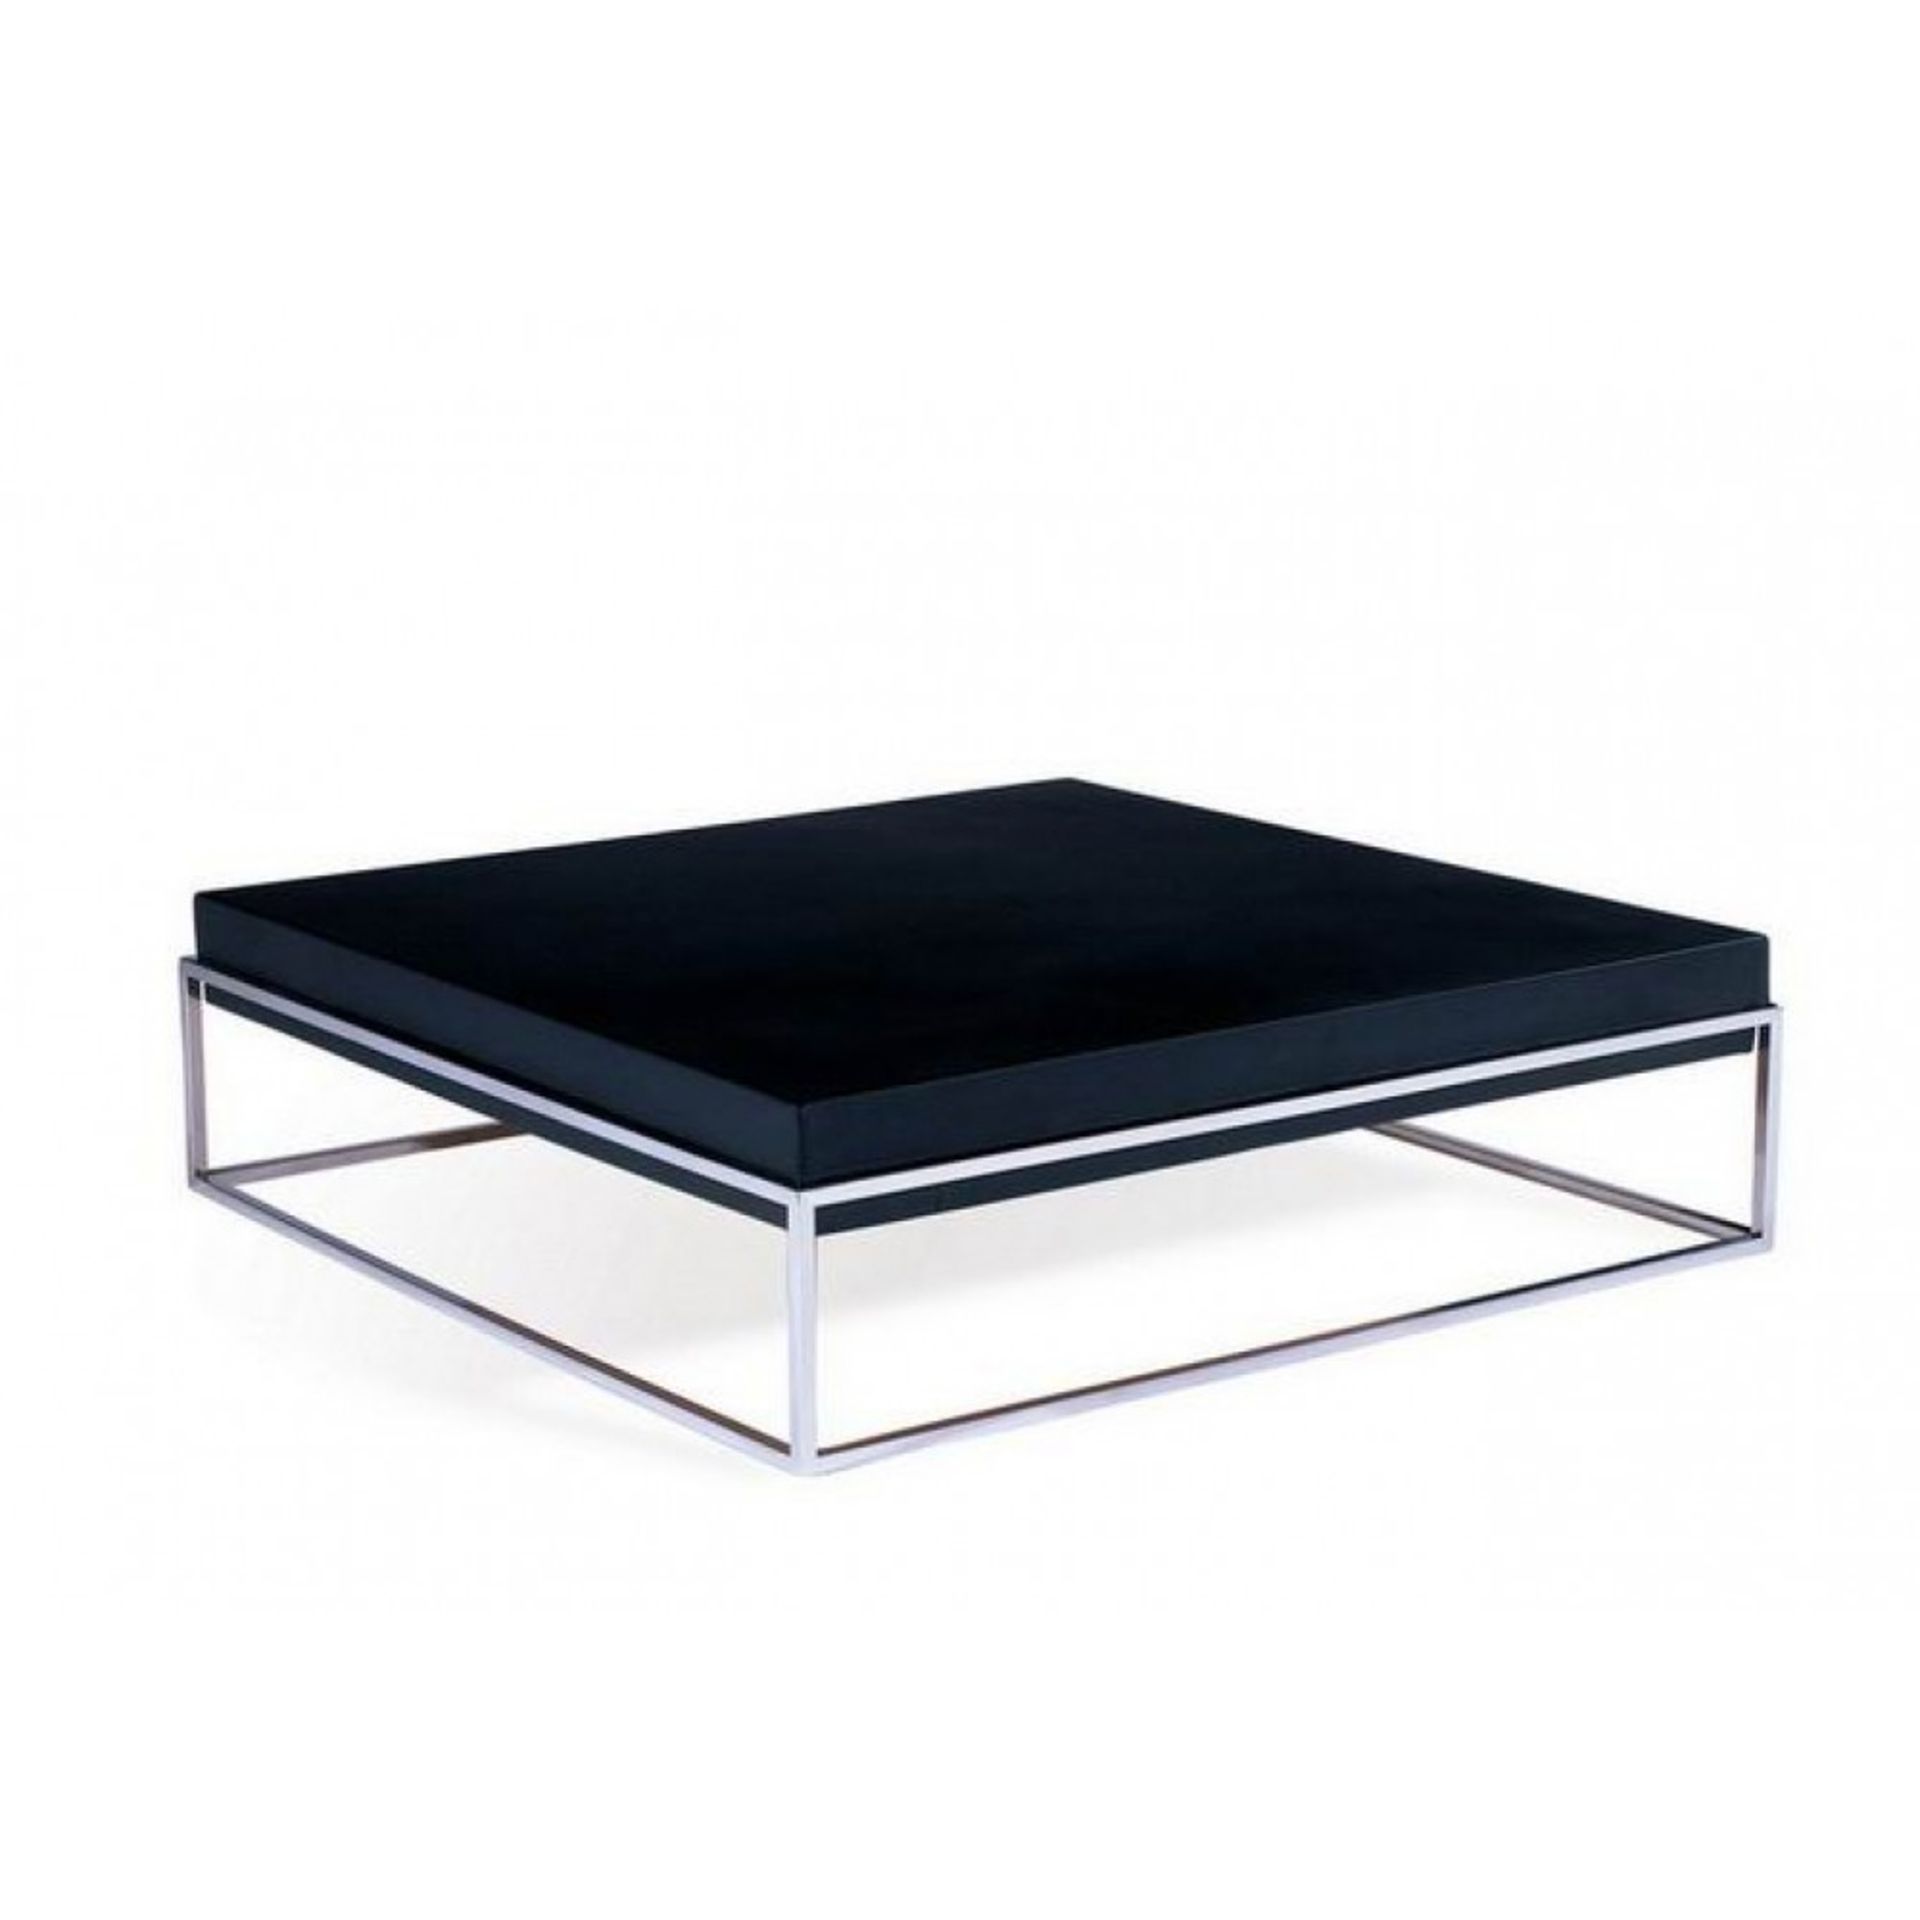 Boxed/As New - Auctor FT Chrome Frame with Black Faux Leather Coffee Table Top (Model CT021L).